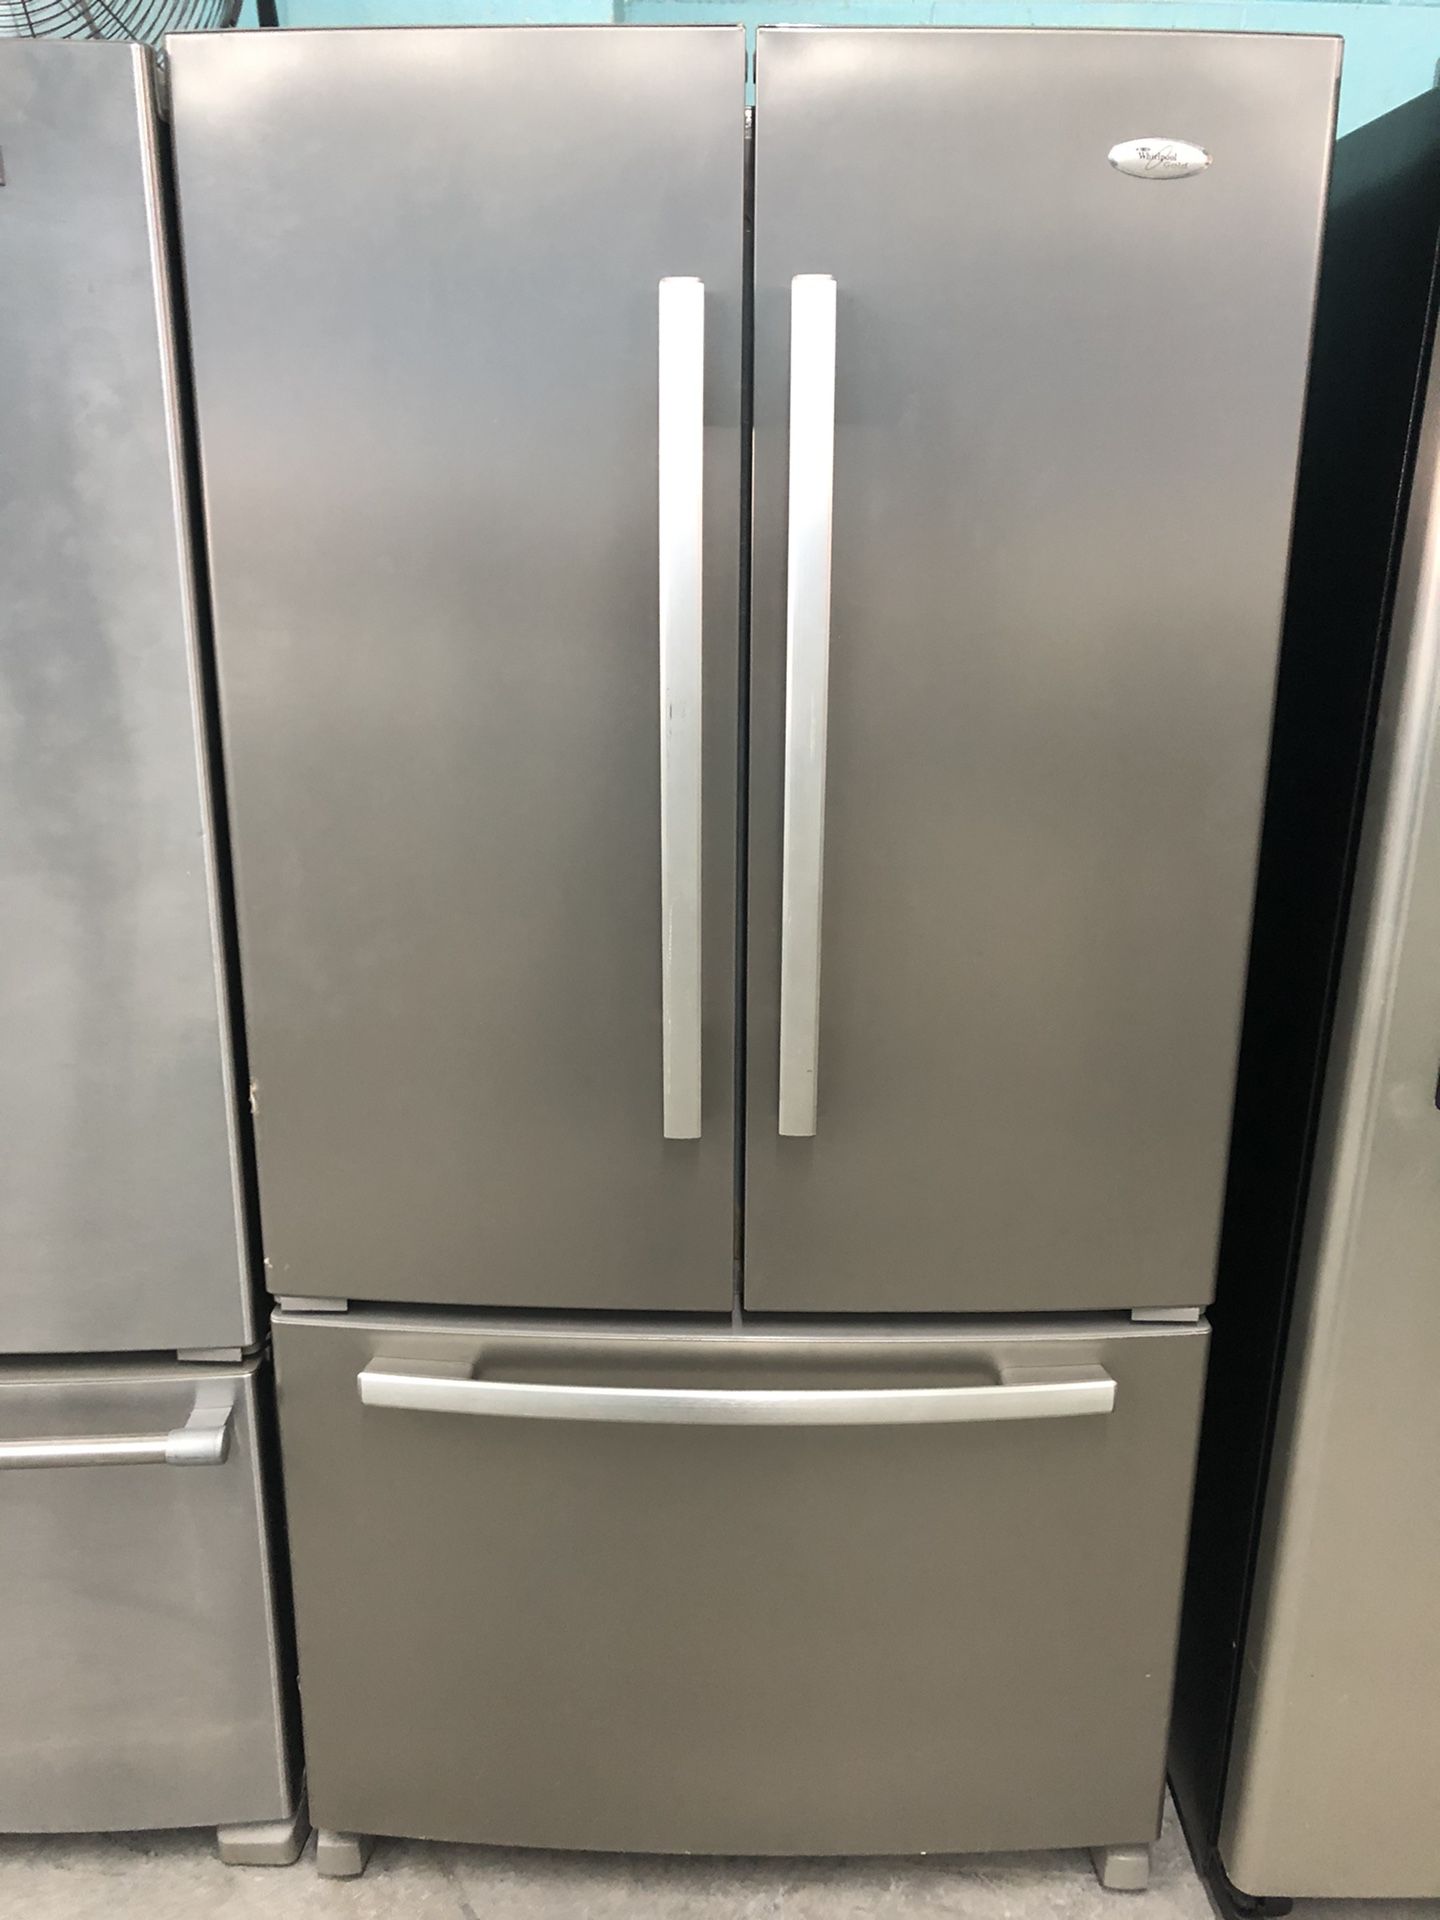 Whirlpool Stainless French Door Refrigerator W/Ice Maker